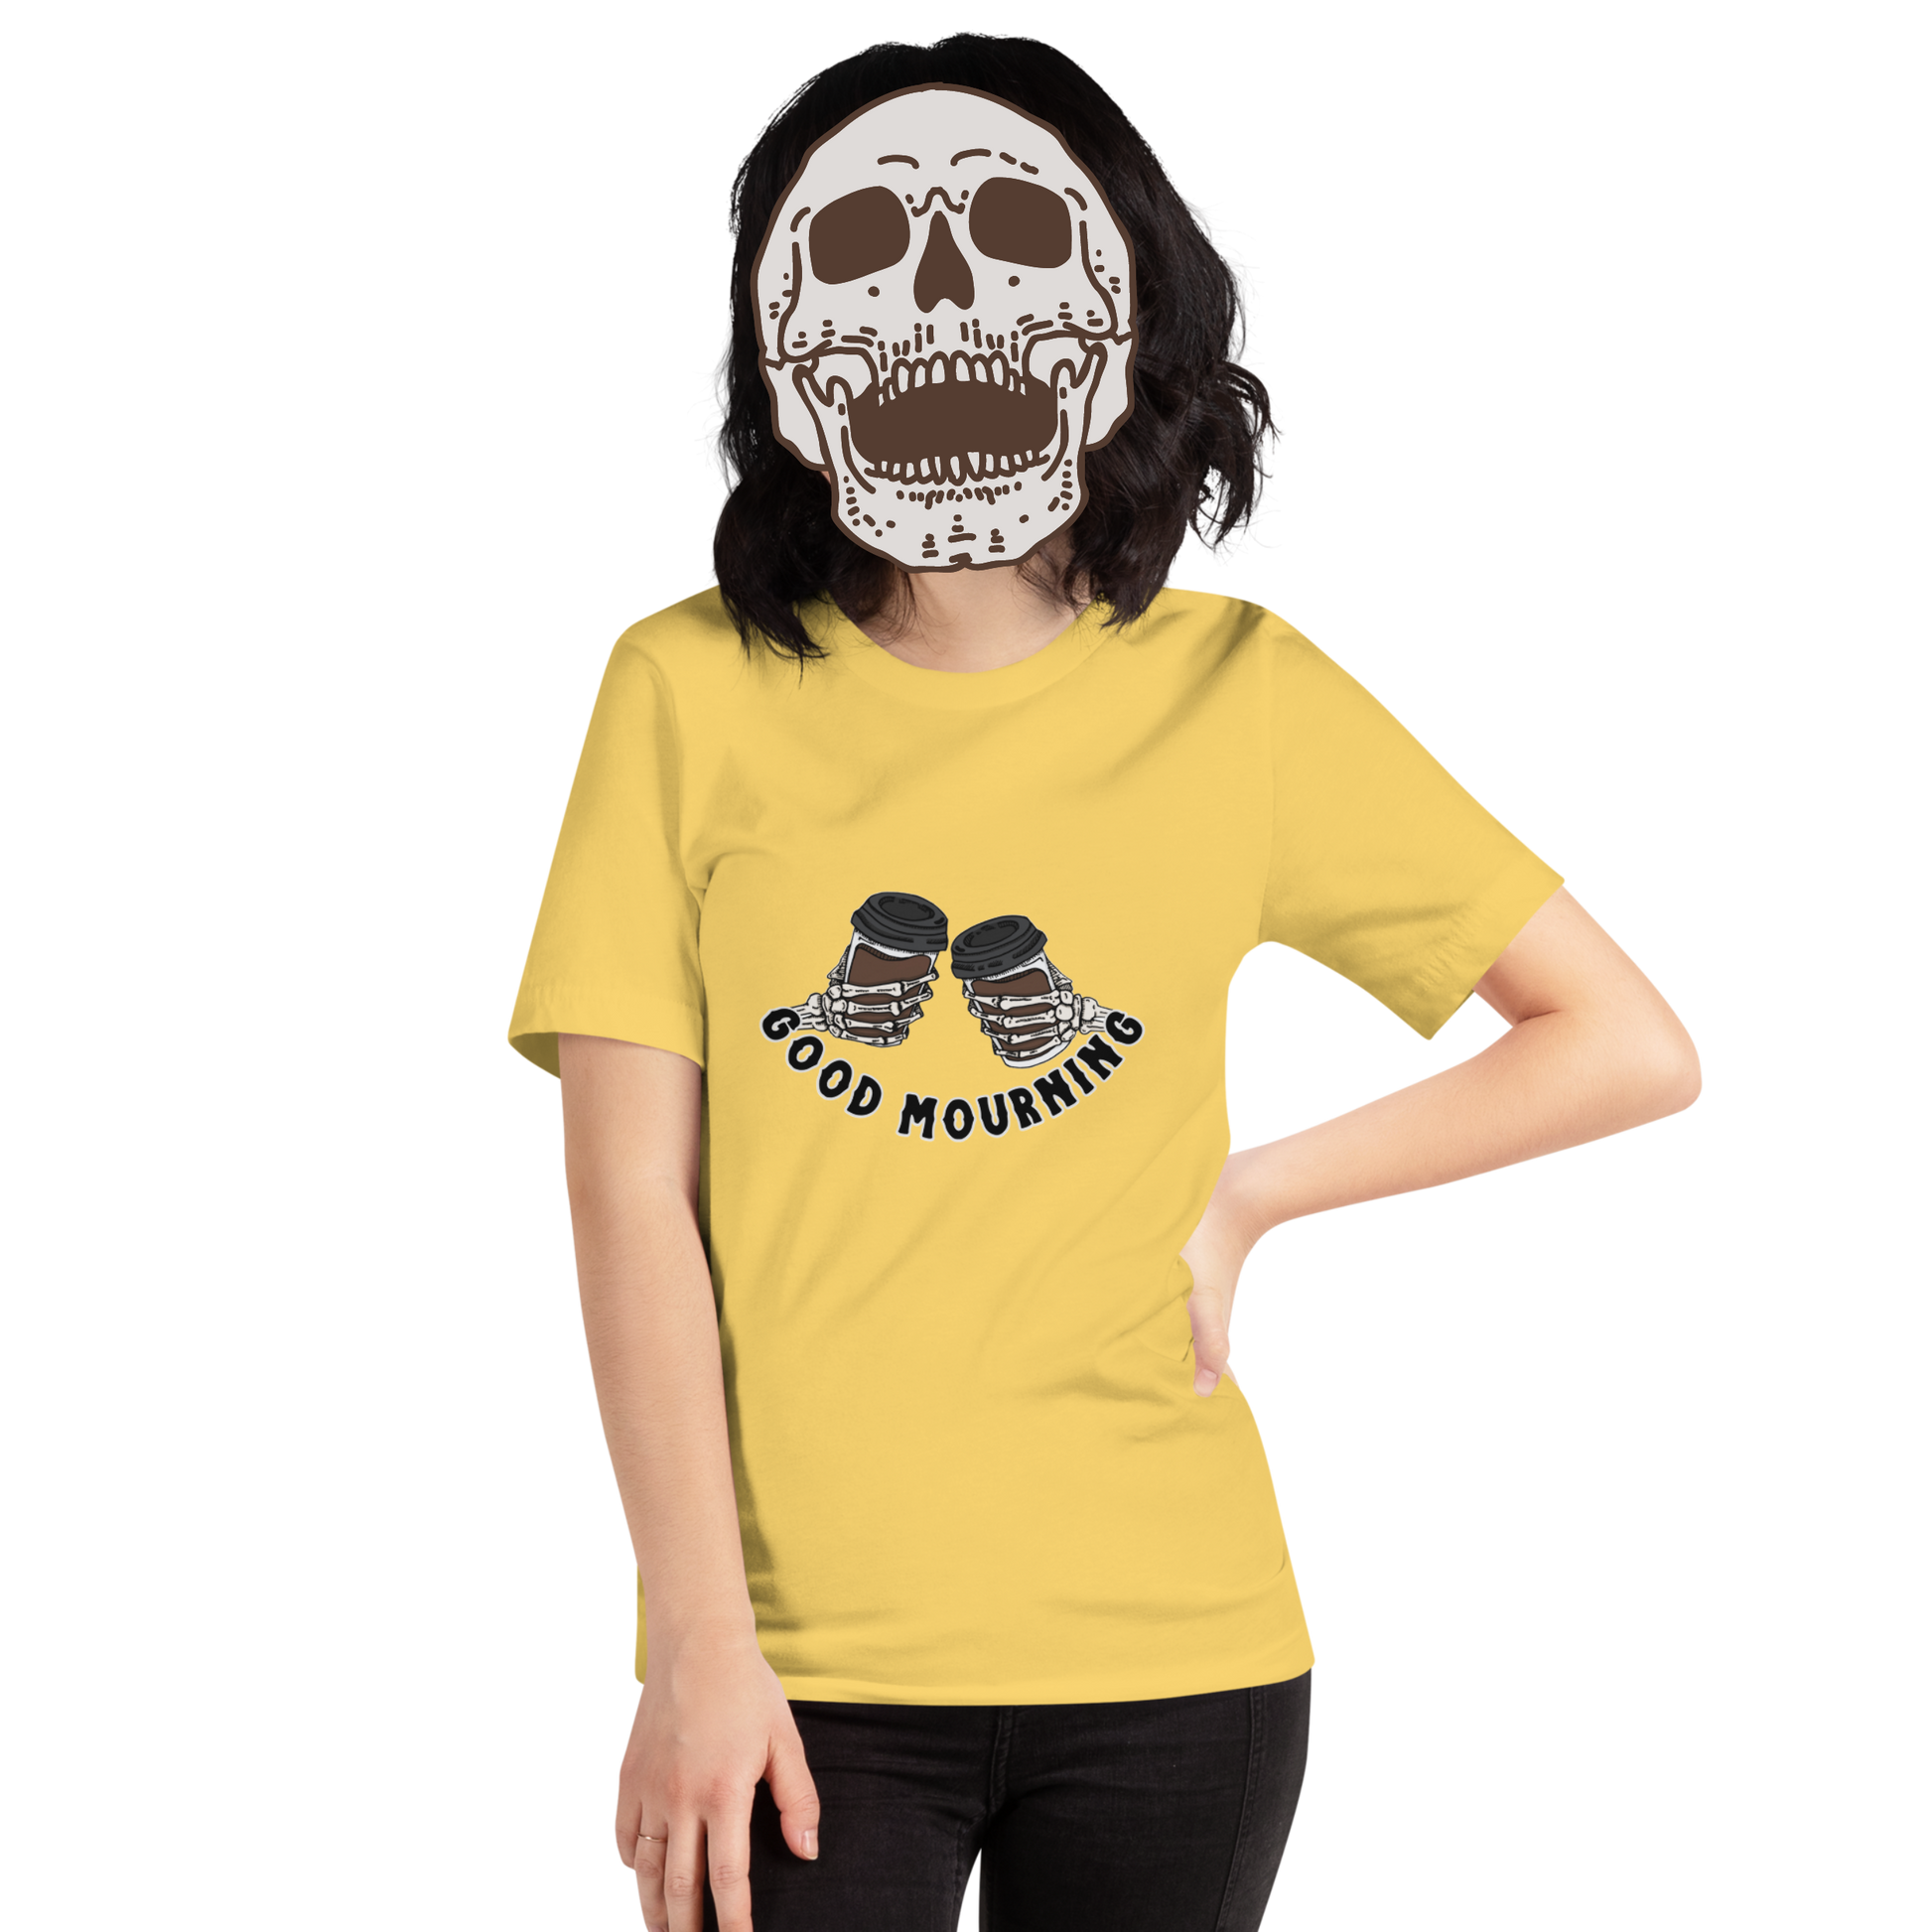 good mourning t-shirt model in yellow - gaslit apparel